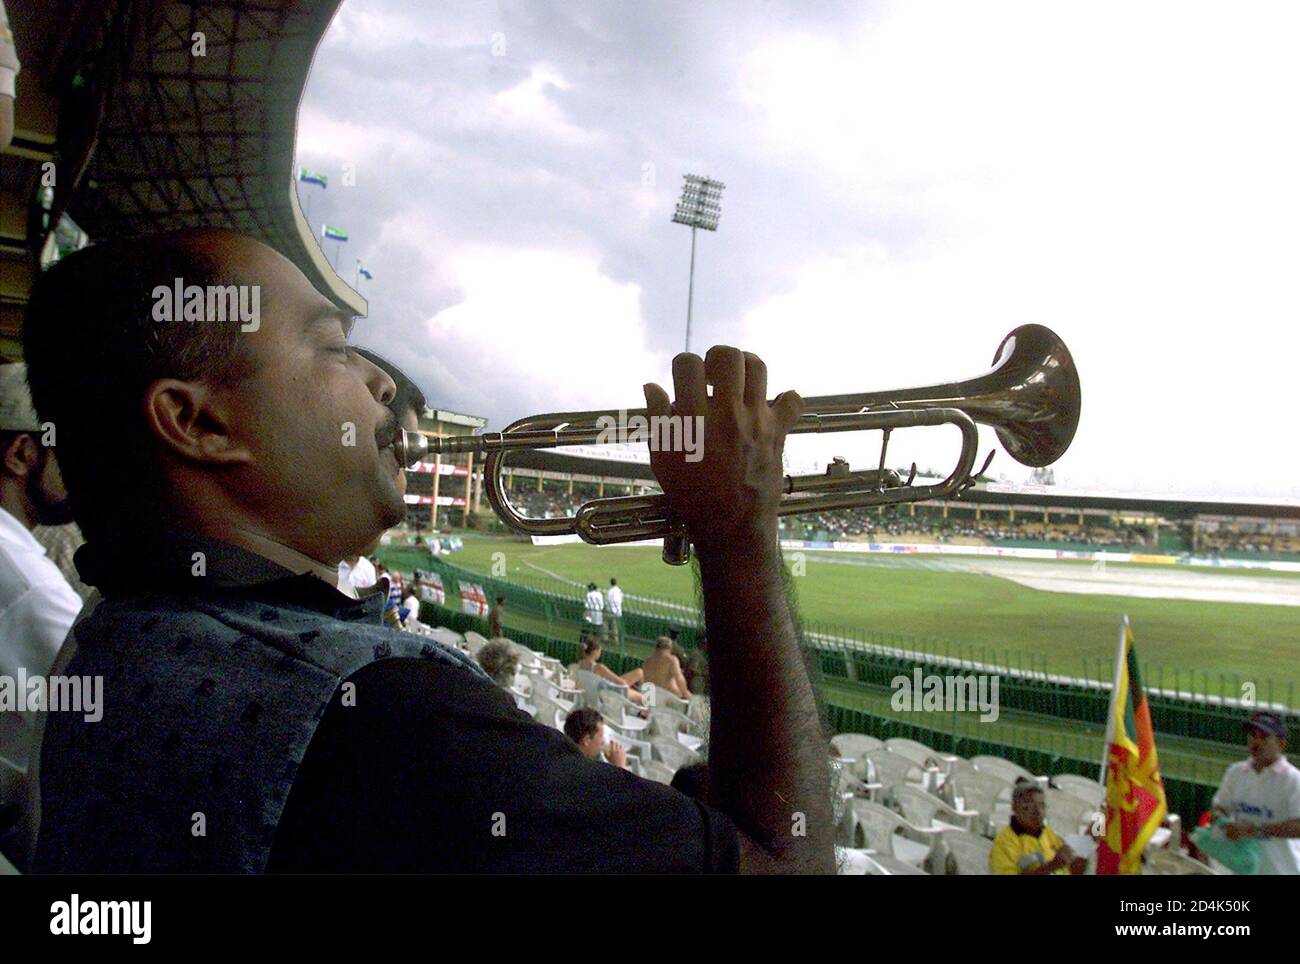 Sri Lankan cricket fans play music at R. Premadasa stadium as plastic sheets cover the pitch to protect it from rain prior to the start of the second one-day international between England and Sri Lanka in Colombo November 21, 2003. Start of play was delayed due to wet ground conditions and a light drizzle. Sri Lanka leads 1-0 in the three one-day internationals series between the two countries. REUTERS/Anuruddha Lokuhapuarachchi  AL/TW Stock Photo